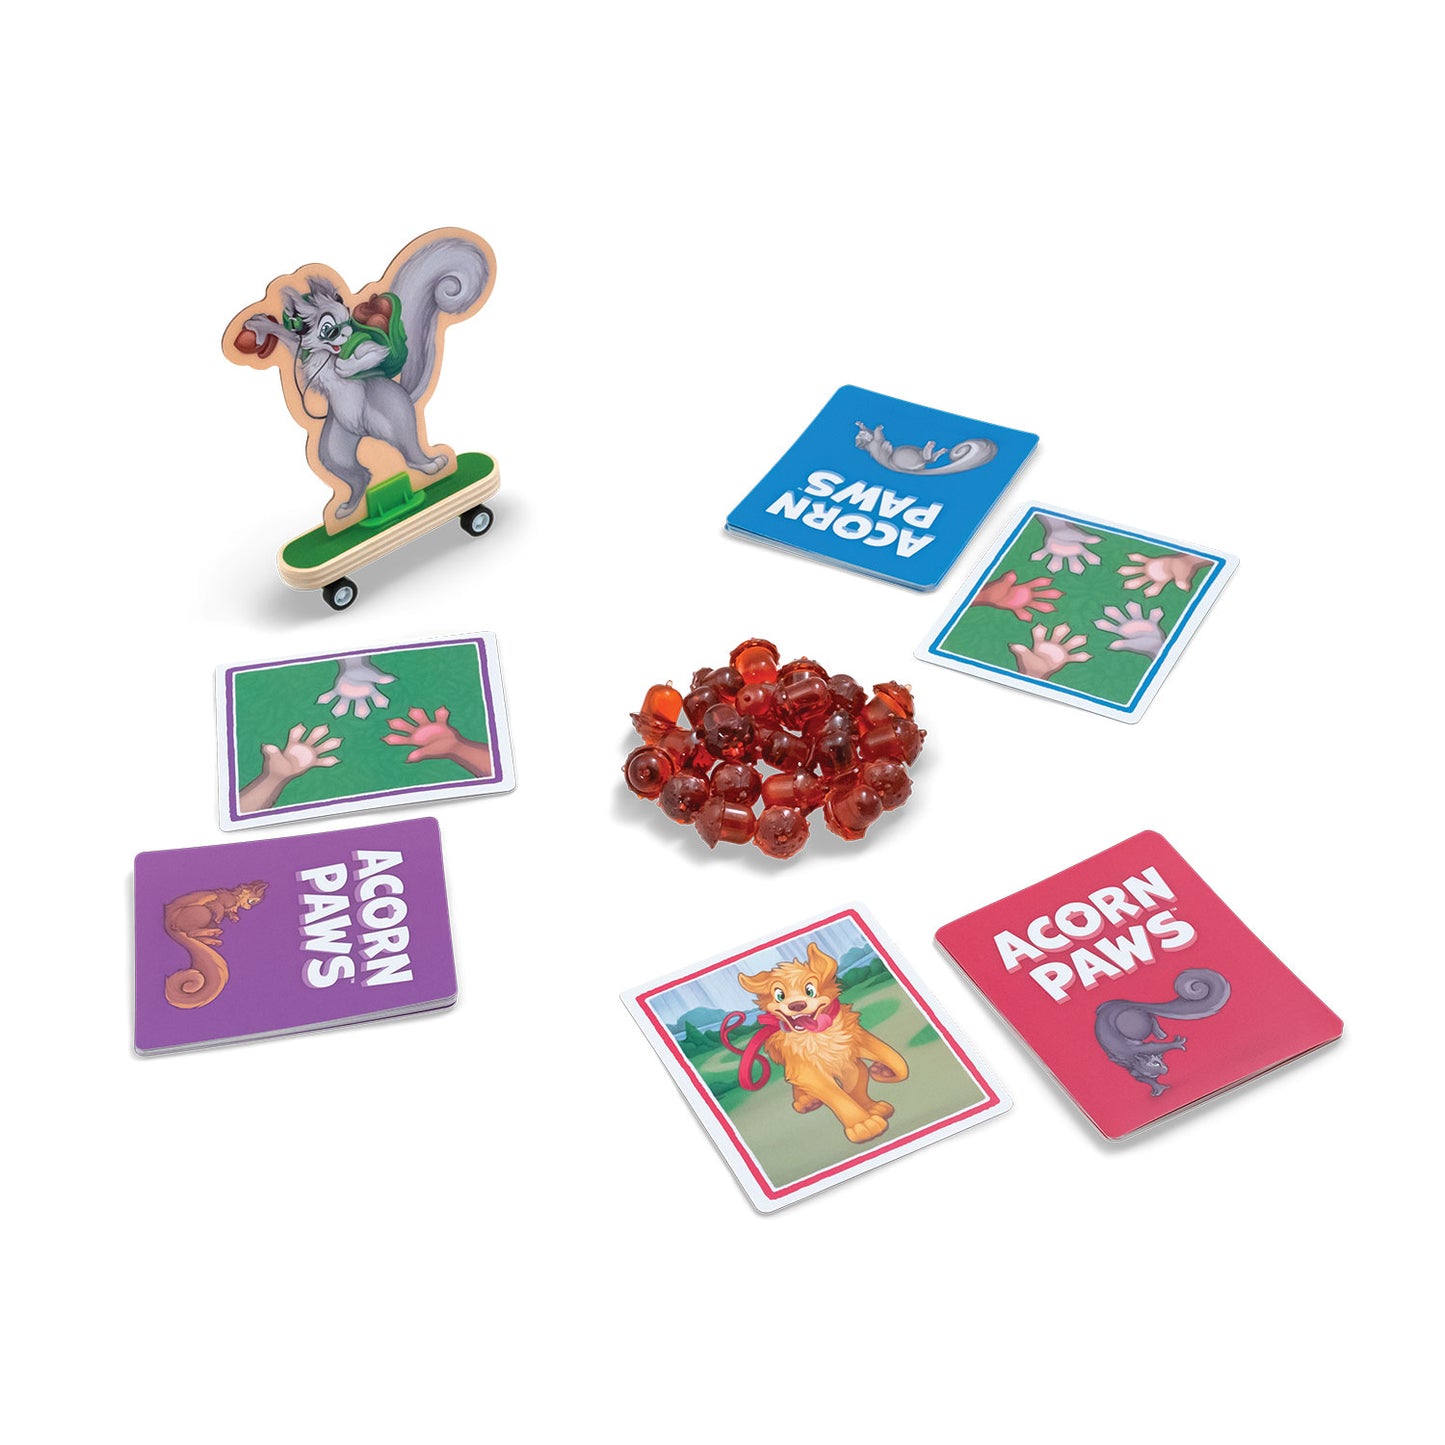 Acorn Paws educational board game by SimplyFun for kids aged 7 and up